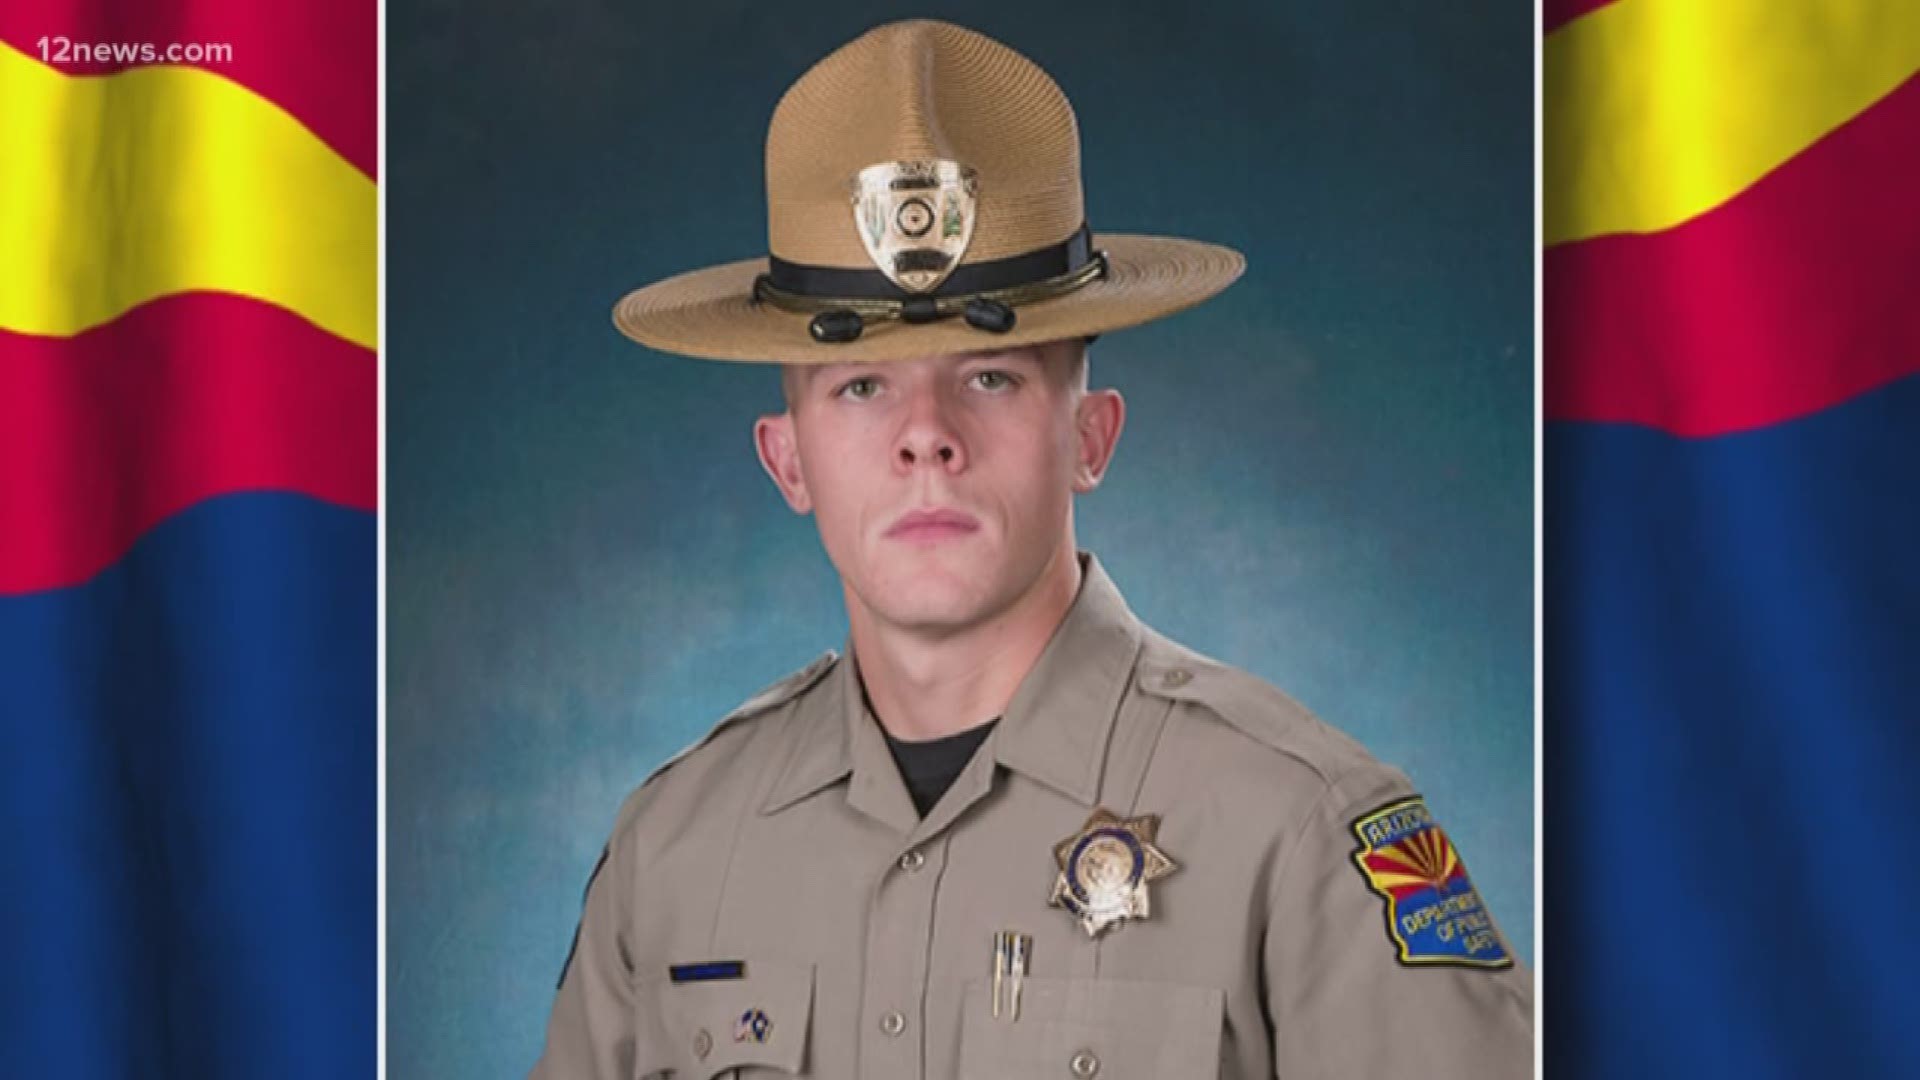 More than 1,000 people gathered to remember a DPS trooper killed in the line of duty. Tyler Edenhofer was remembered by his father and Governor Ducey at the candlelight vigil.